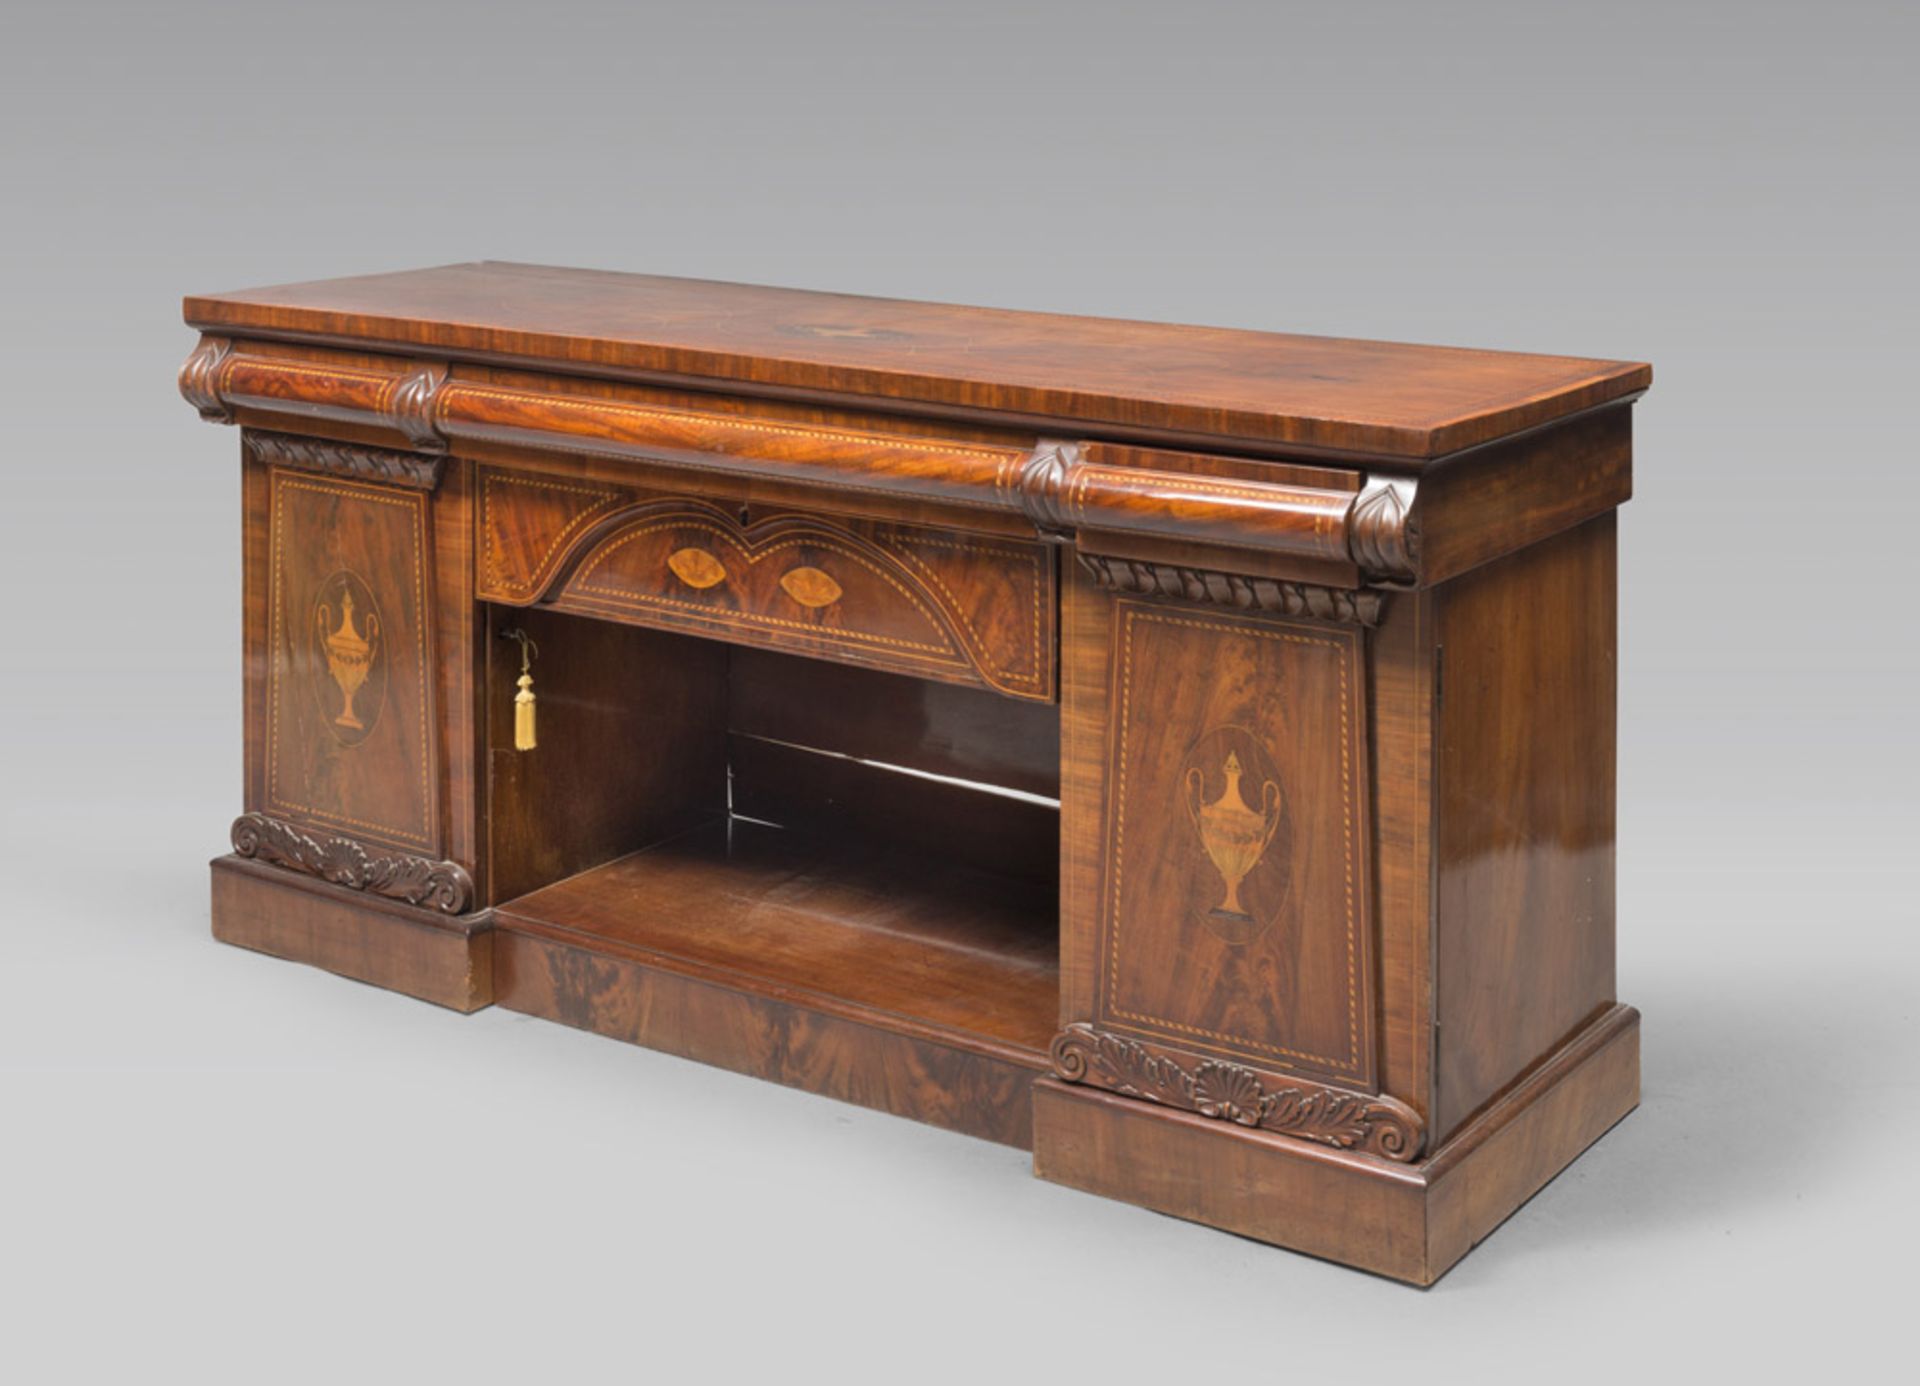 Mahogany Sideboard with edgings and reserves in satin wood and palissandro and inlays in woods of